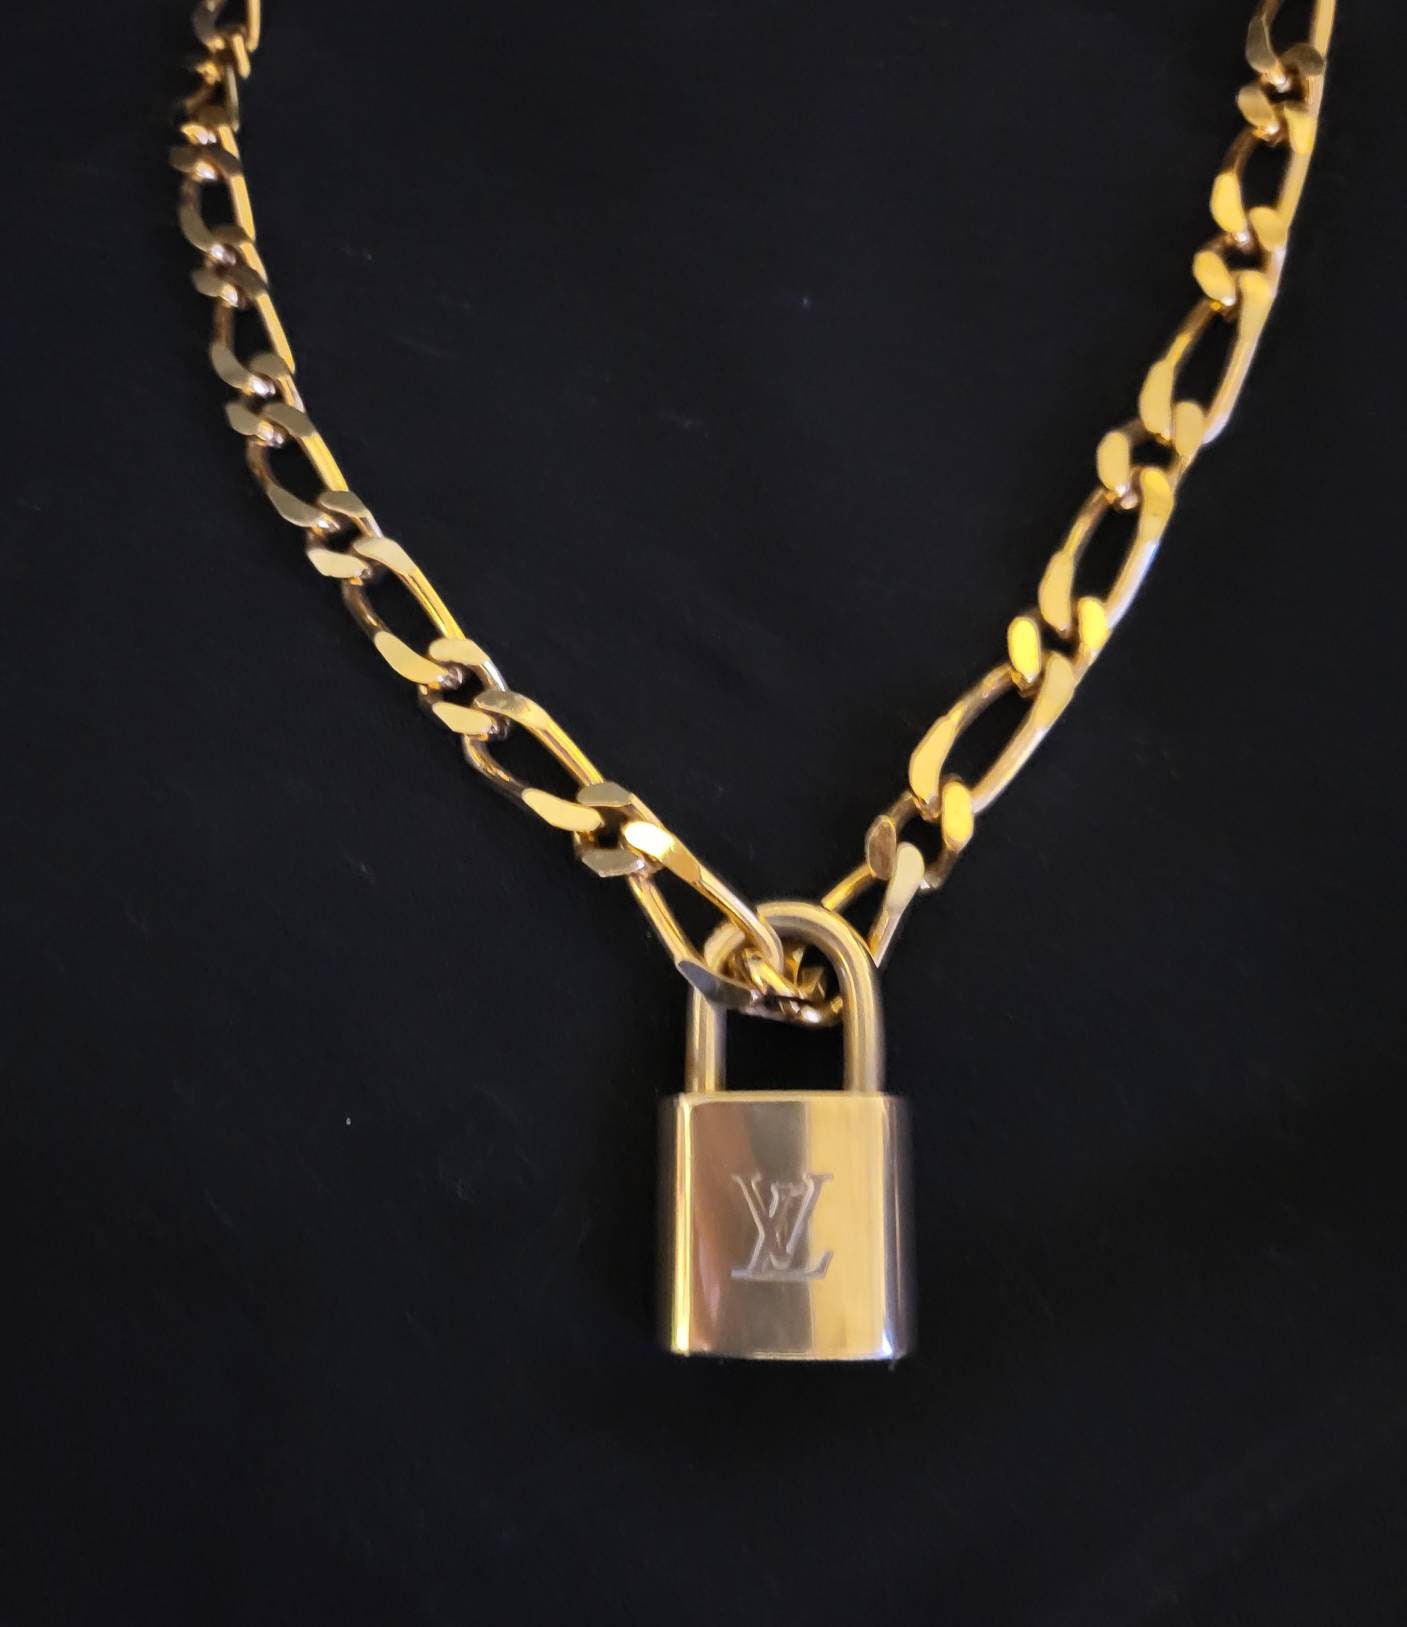 Authentic Louis Vuitton Lock ONLY for Charm Necklace lock is 